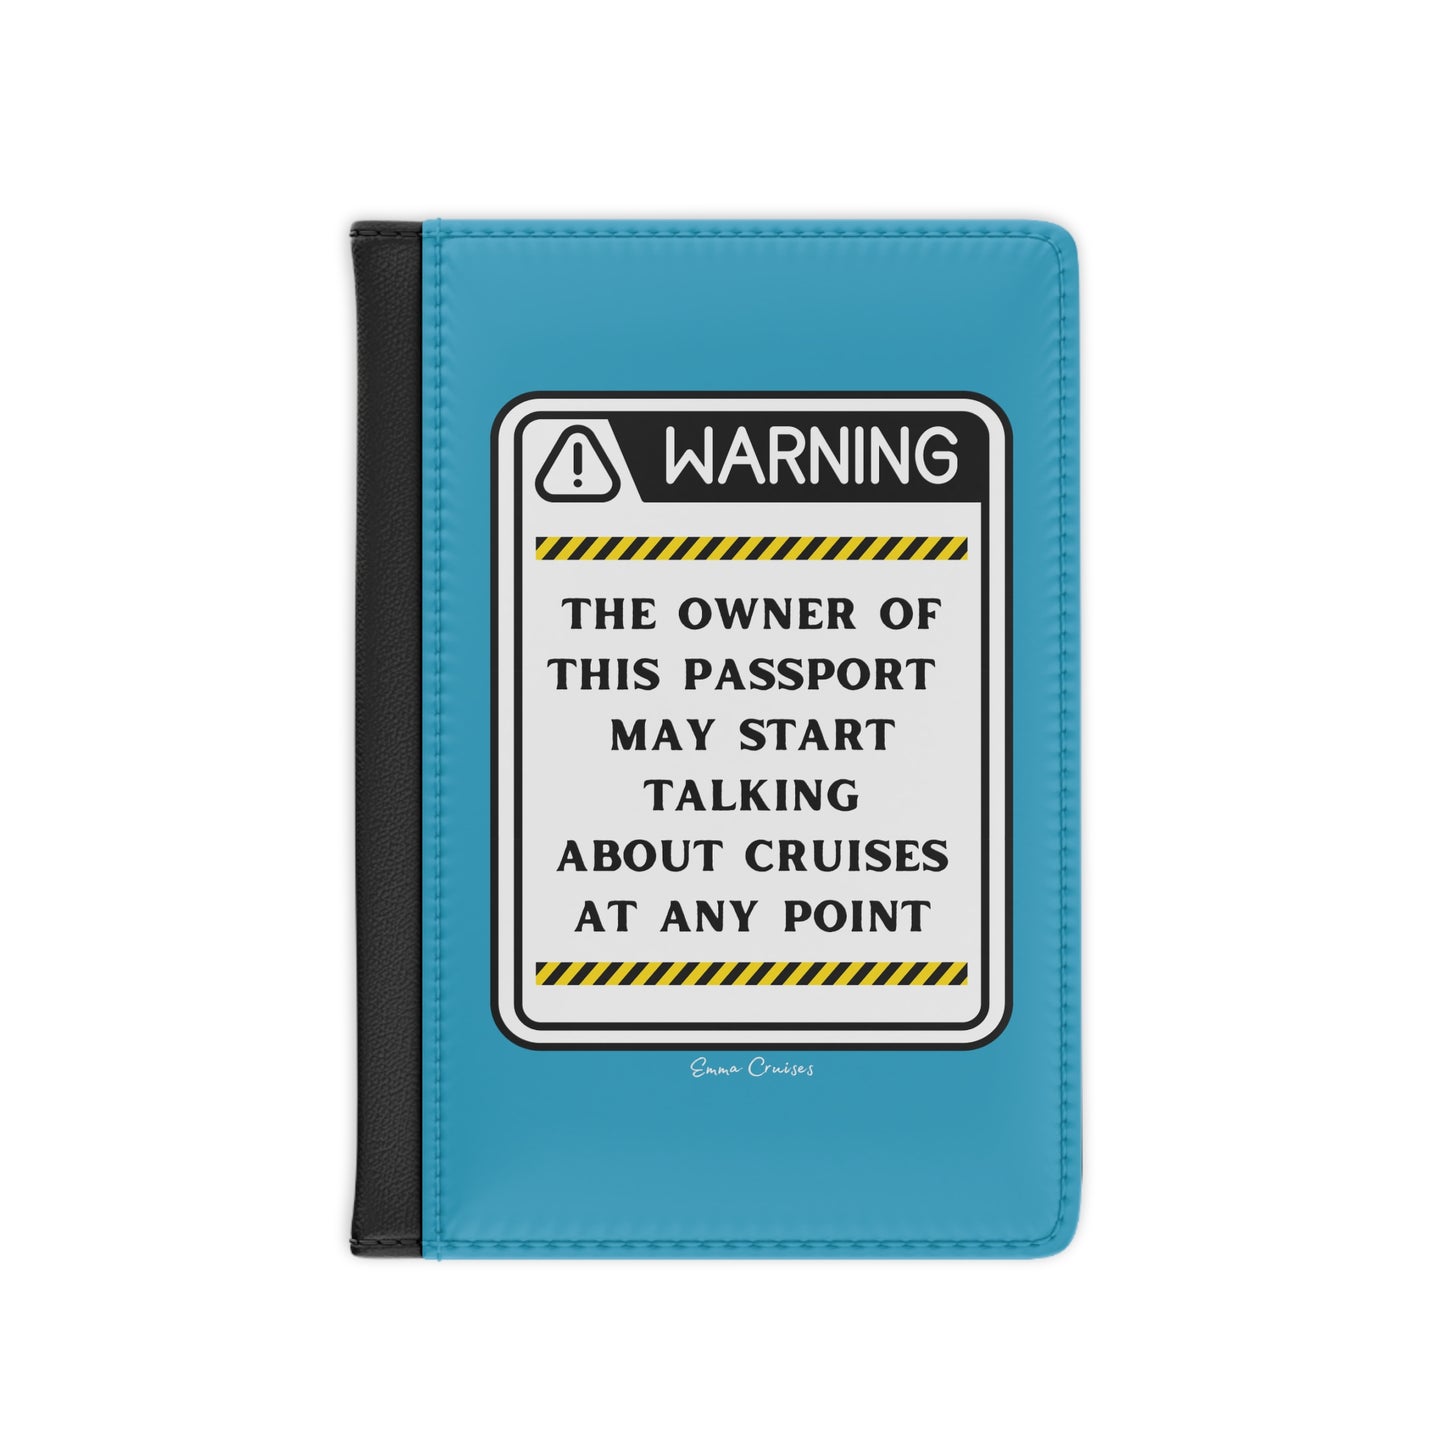 May Start Talking About Cruises - Passport Cover